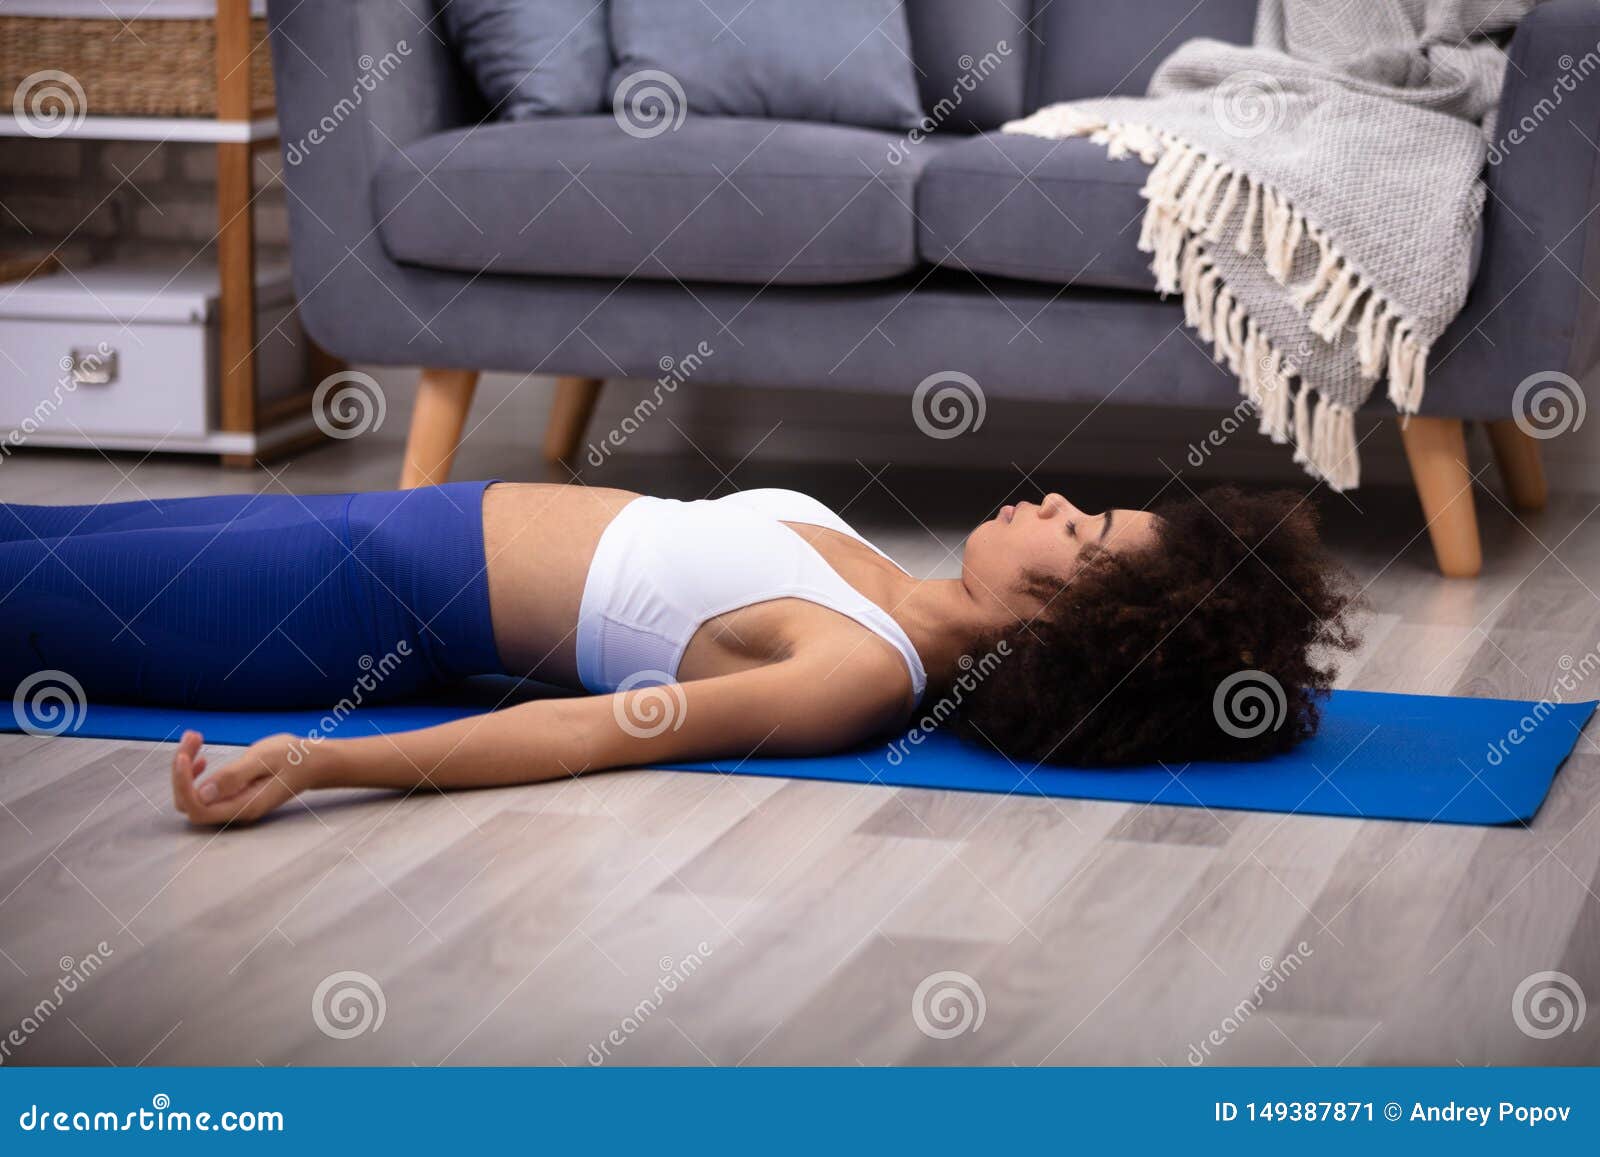 Woman Lying On Blue Yoga Mat Stock Image Image Of Exercise Home